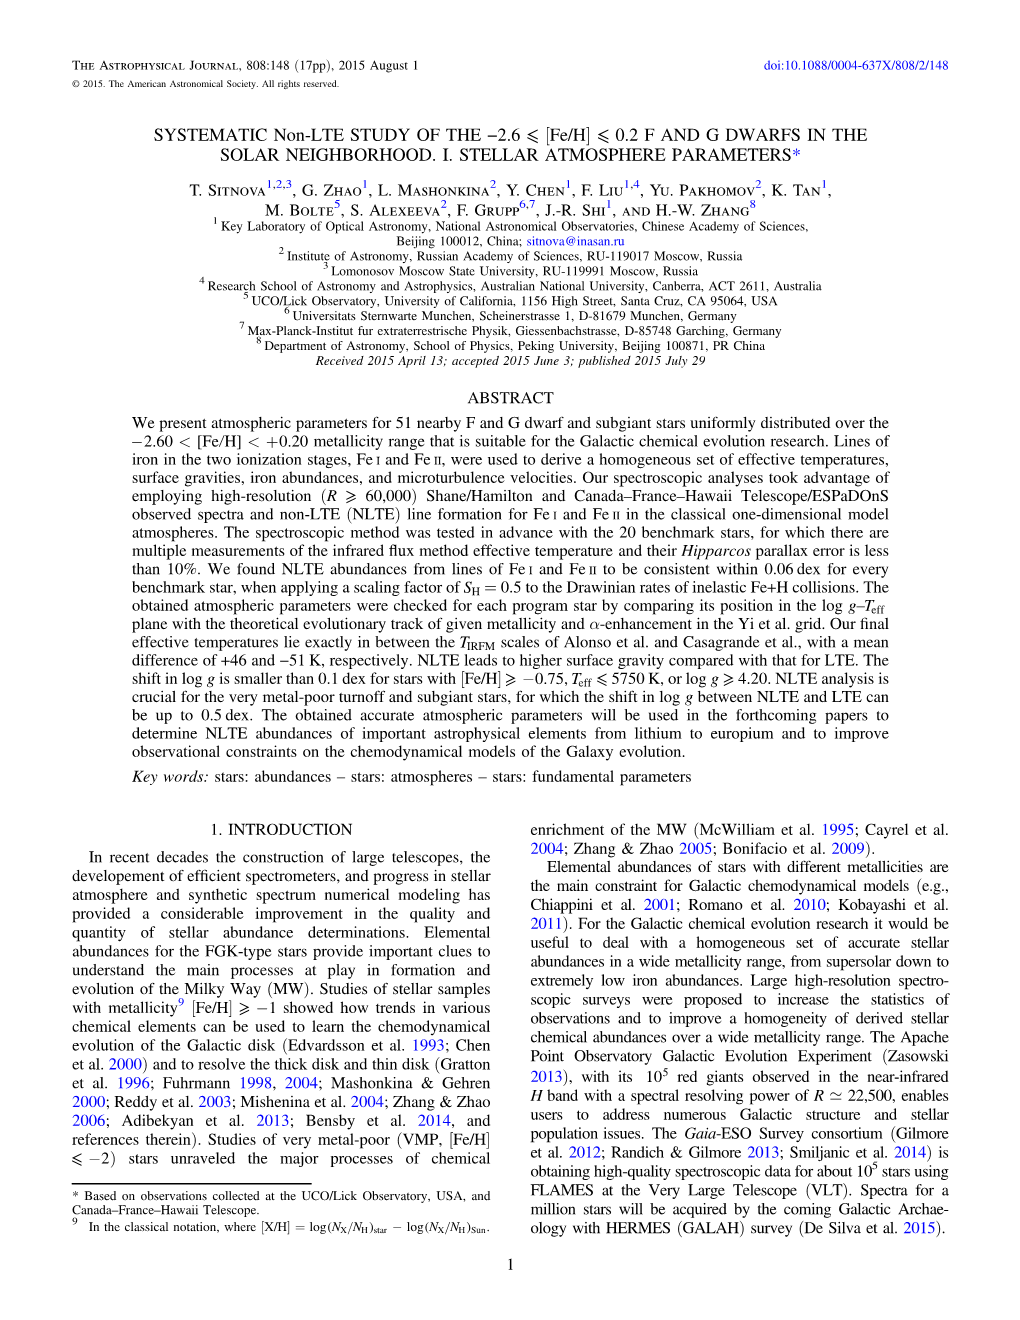 SYSTEMATIC Non-LTE STUDY of the −2.6 [Fe/H] 0.2 F and G